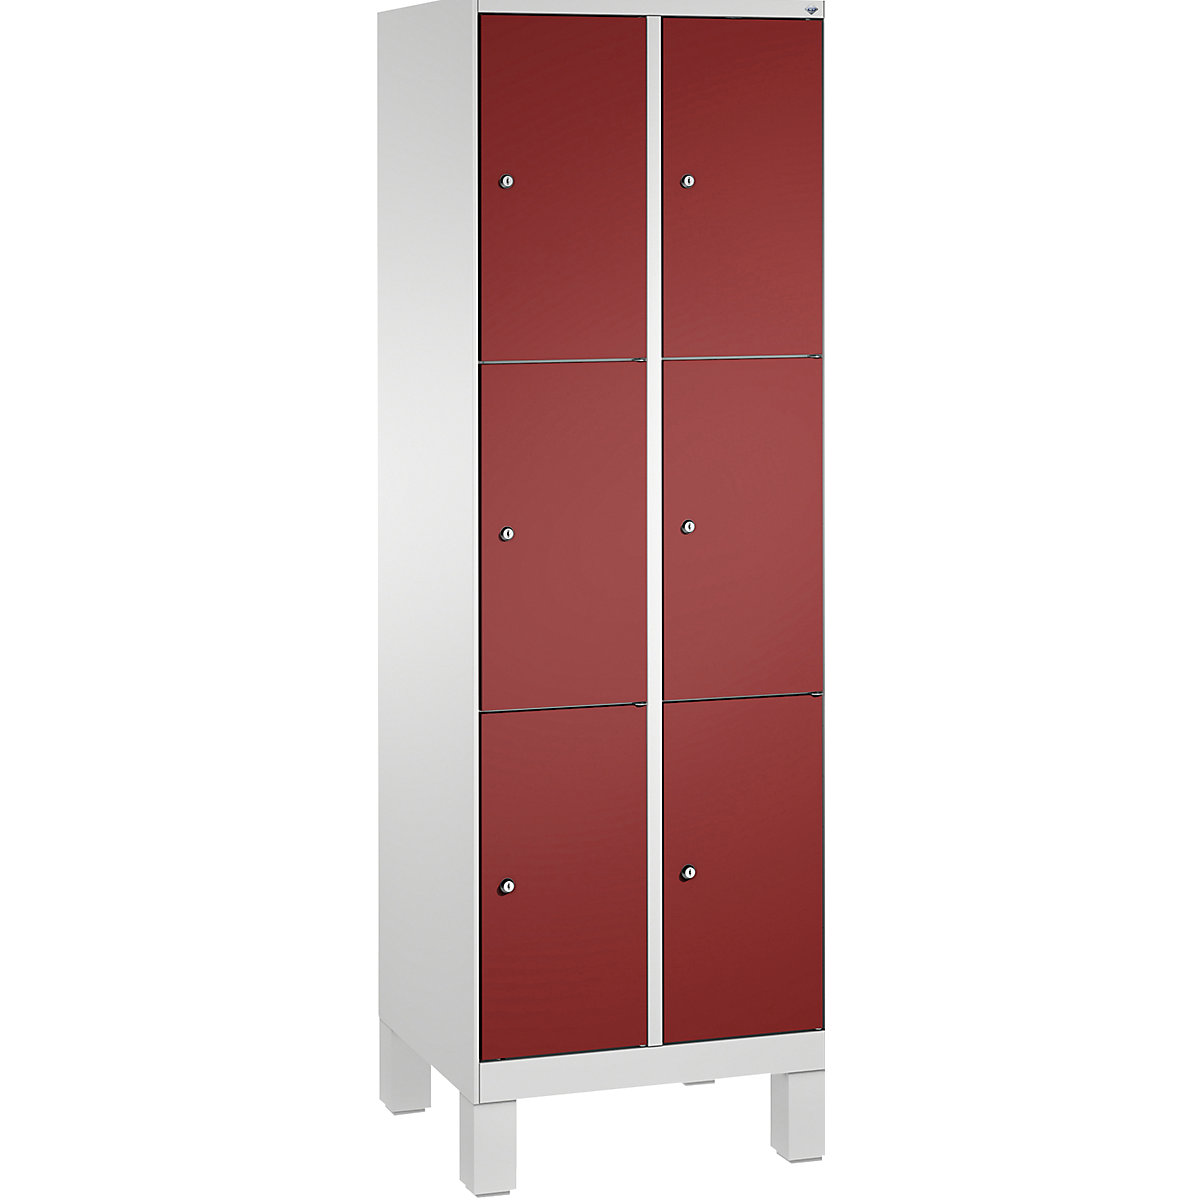 EVOLO locker unit, with feet – C+P, 2 compartments, 3 shelf compartments each, compartment width 300 mm, light grey / ruby red-8